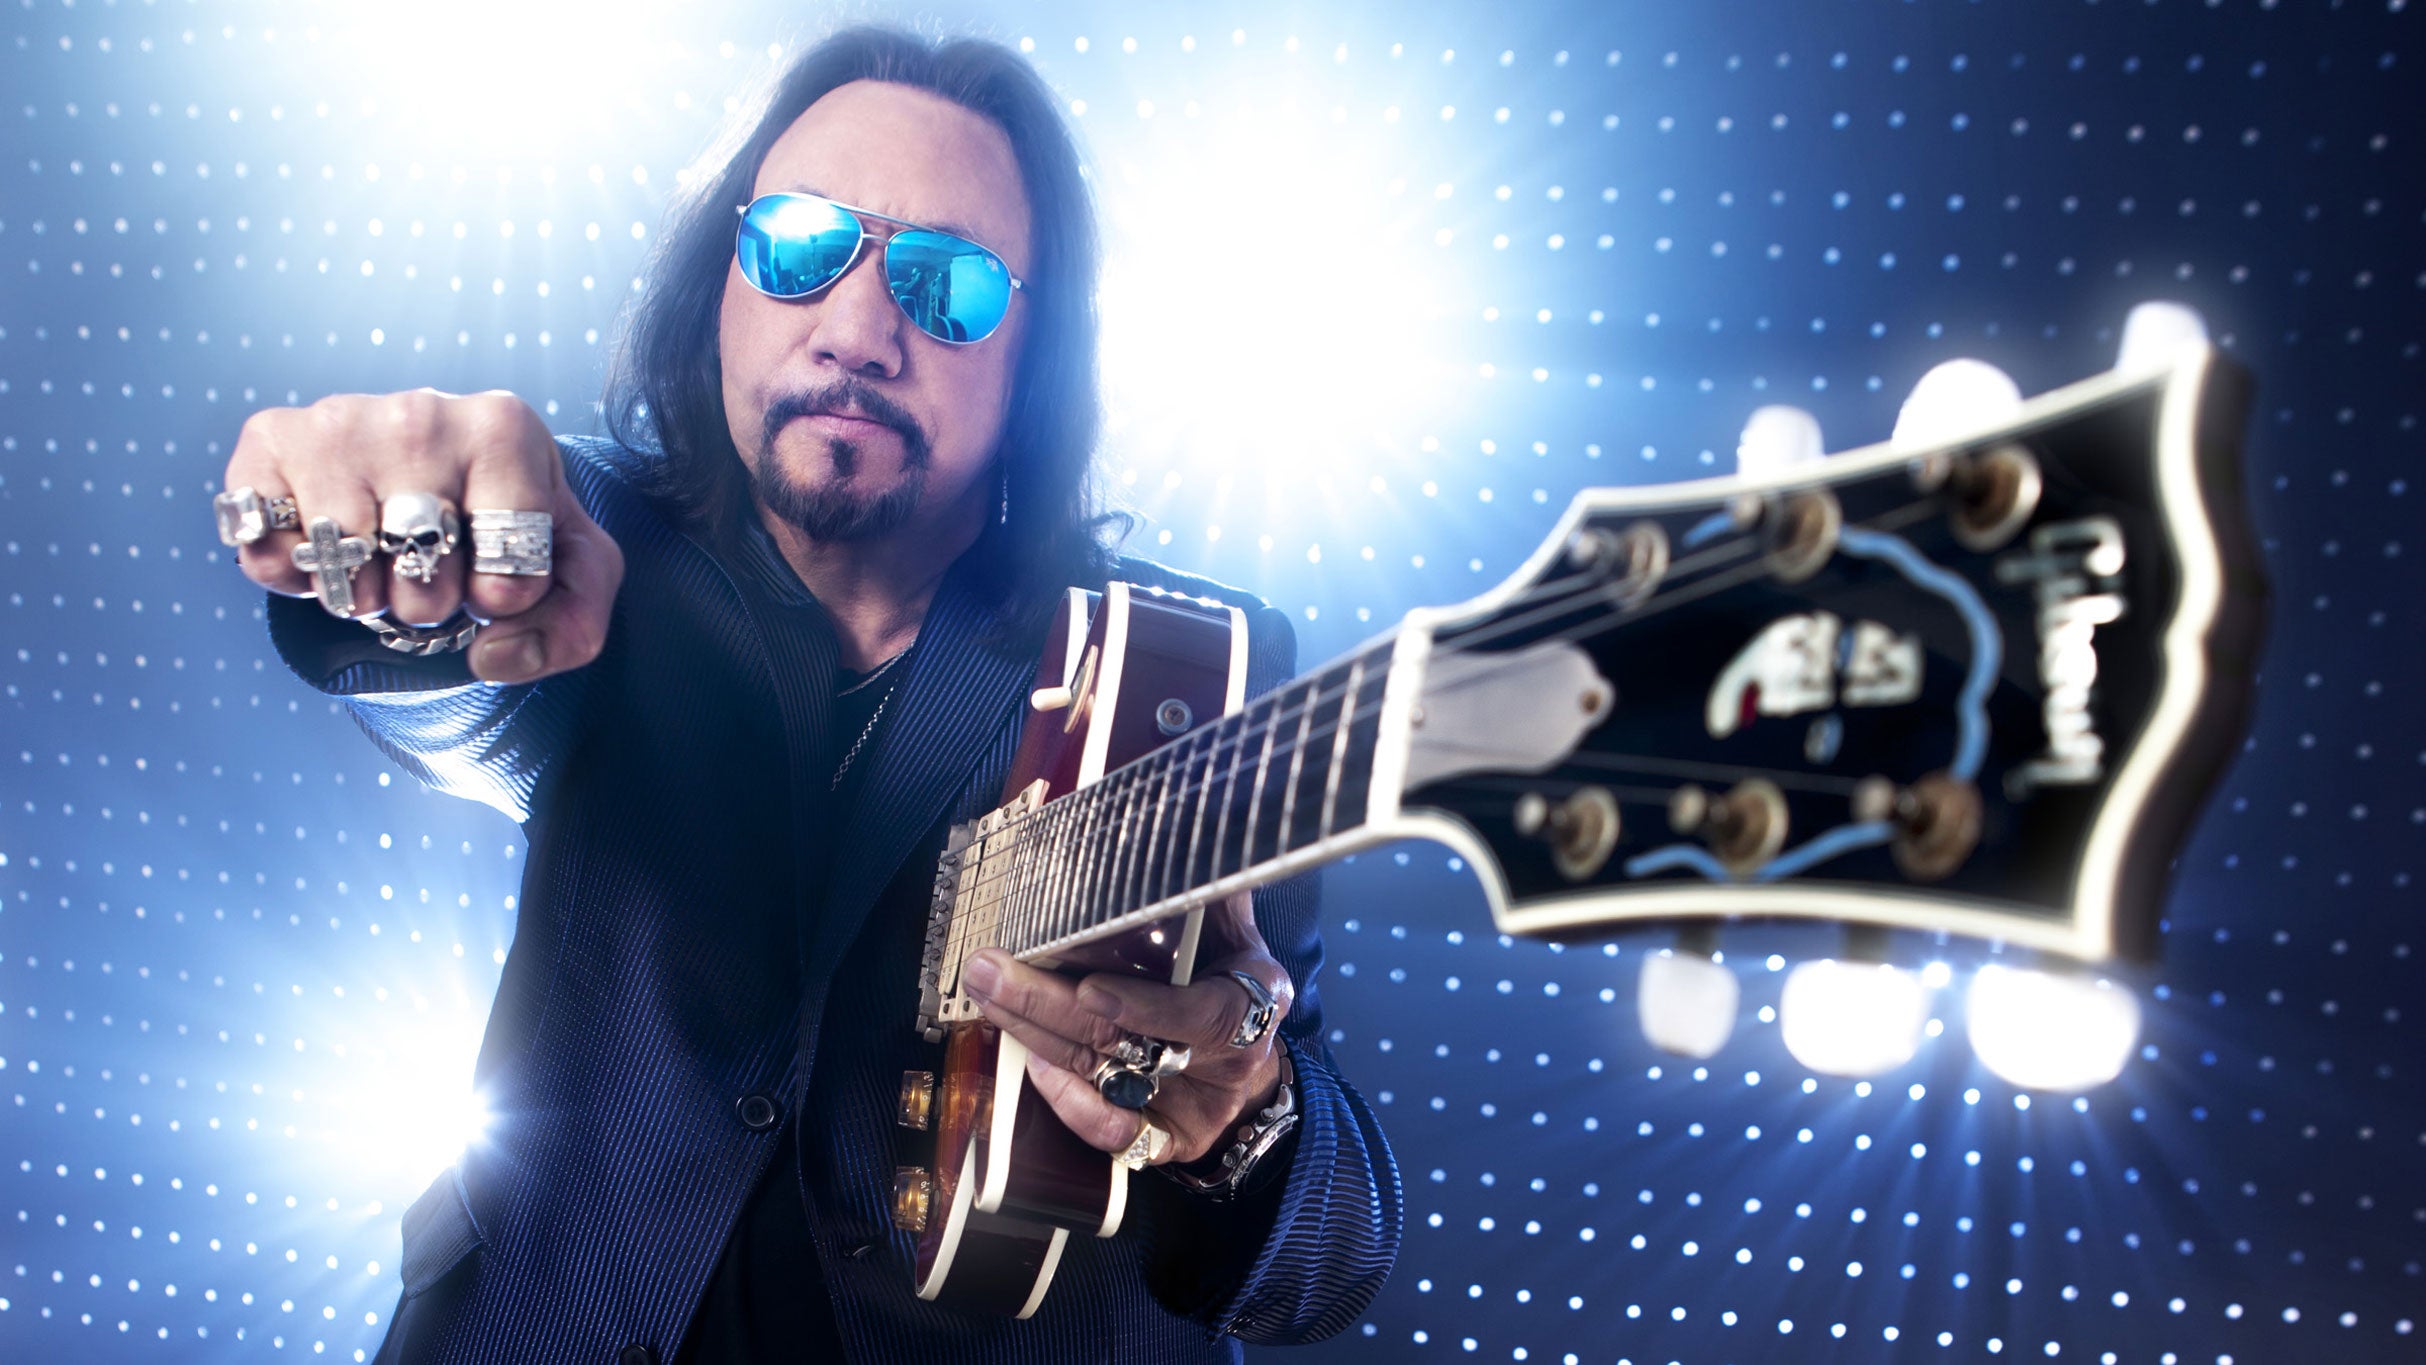 Ace Frehley in Anderson promo photo for Paramount Season Partner and Partners presale offer code